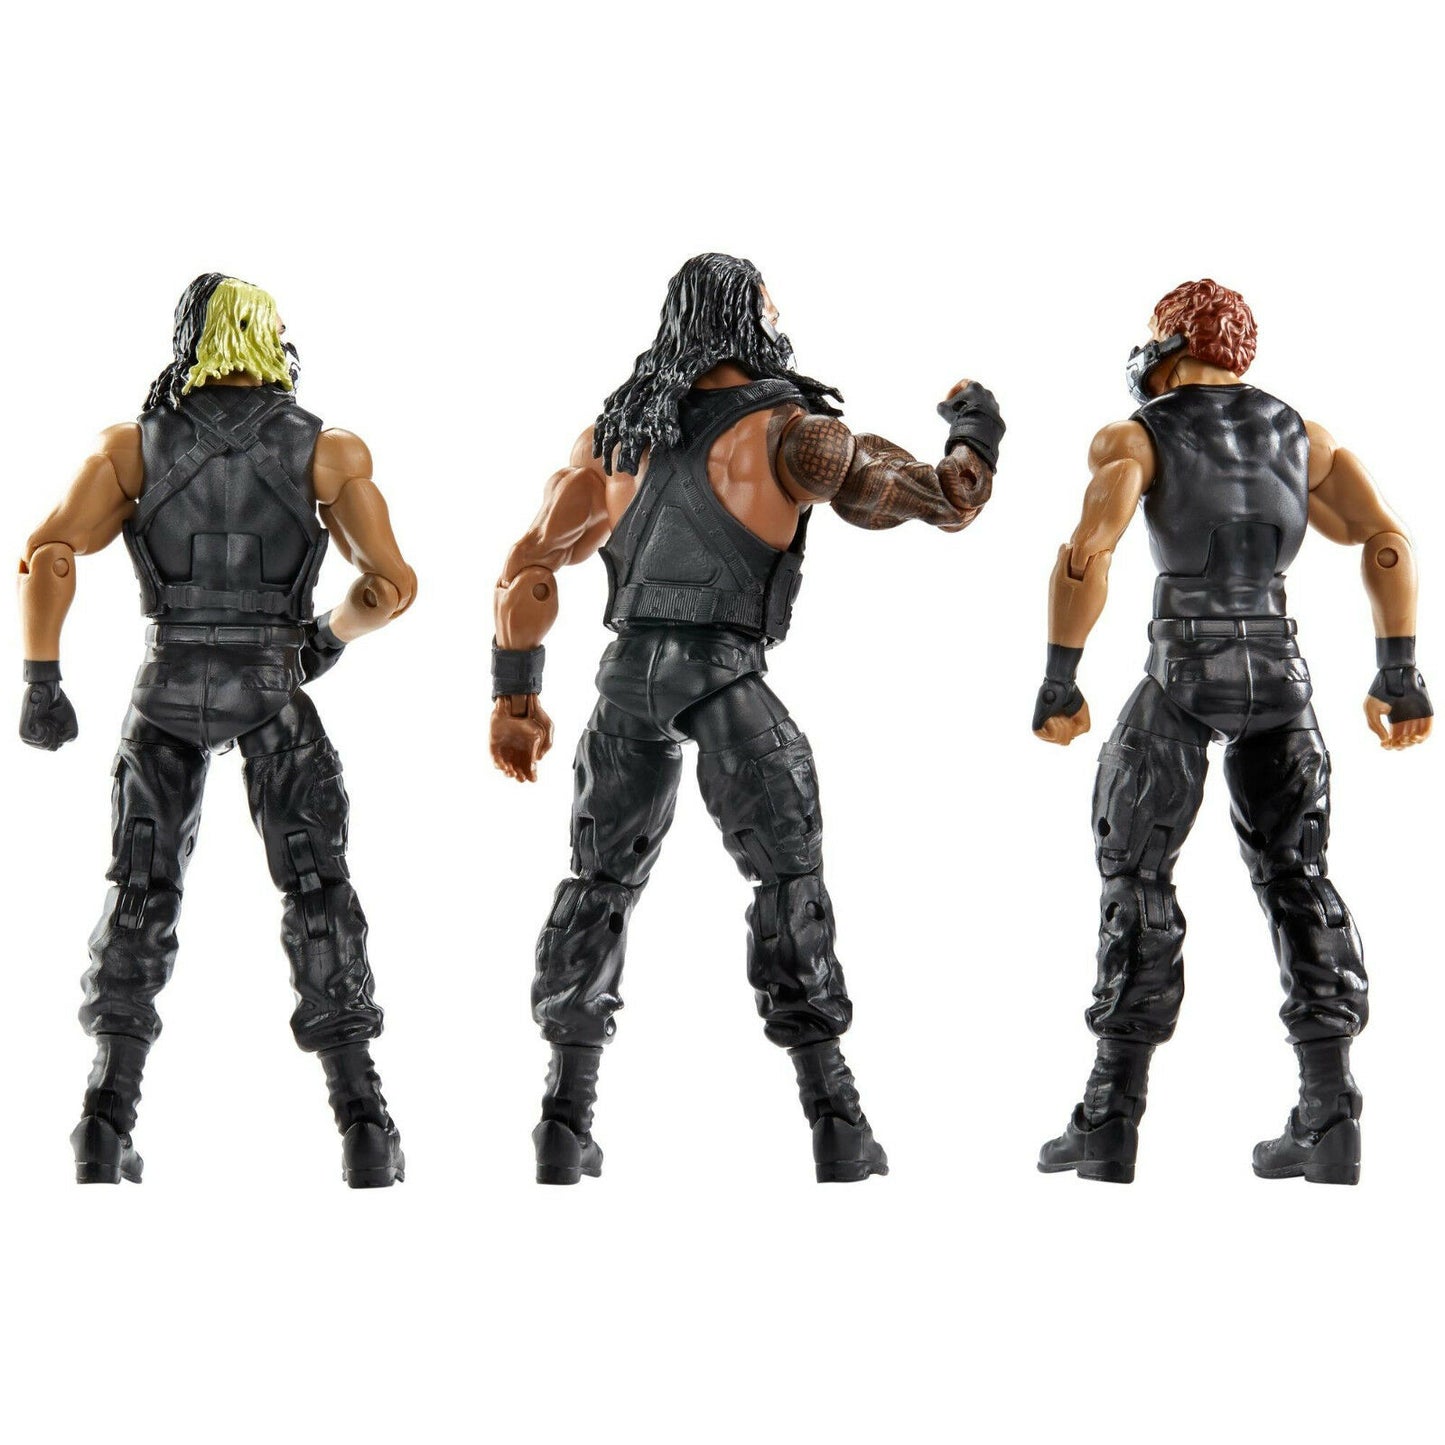 WWE Mattel Then, Now, Forever Multipack: The Shield: Seth Rollins, Dean Ambrose & Roman Reigns [Exclusive]